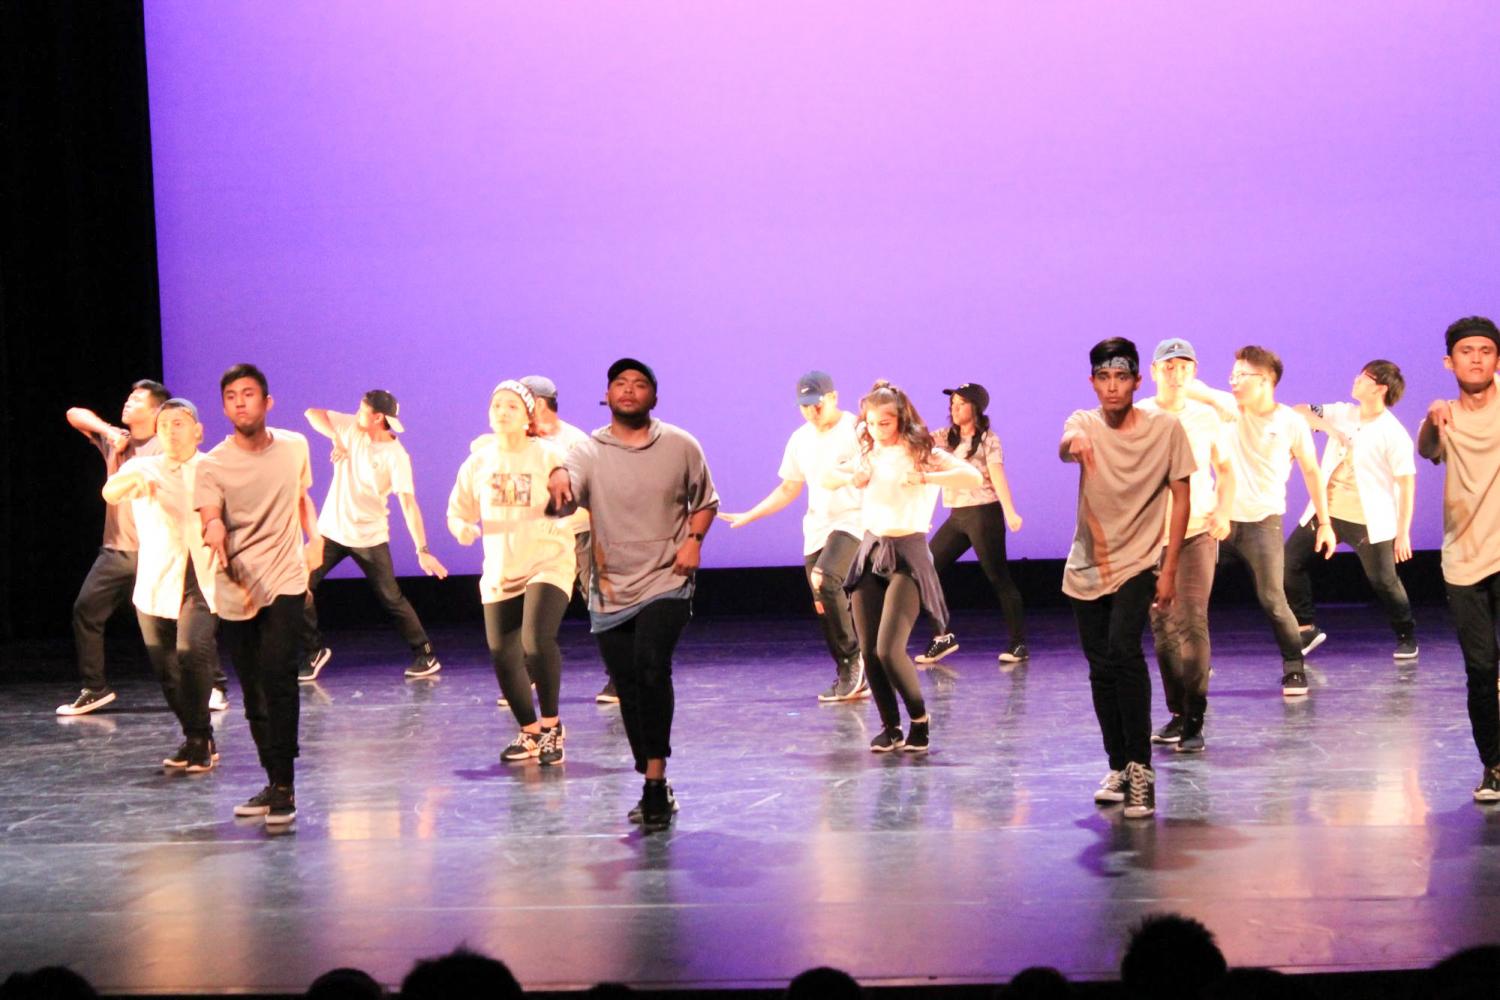 De Anza’s Dance Workshop students perform a song about feminism at the 2017 Dance Showcase in the Euphrat Museum on June 9.